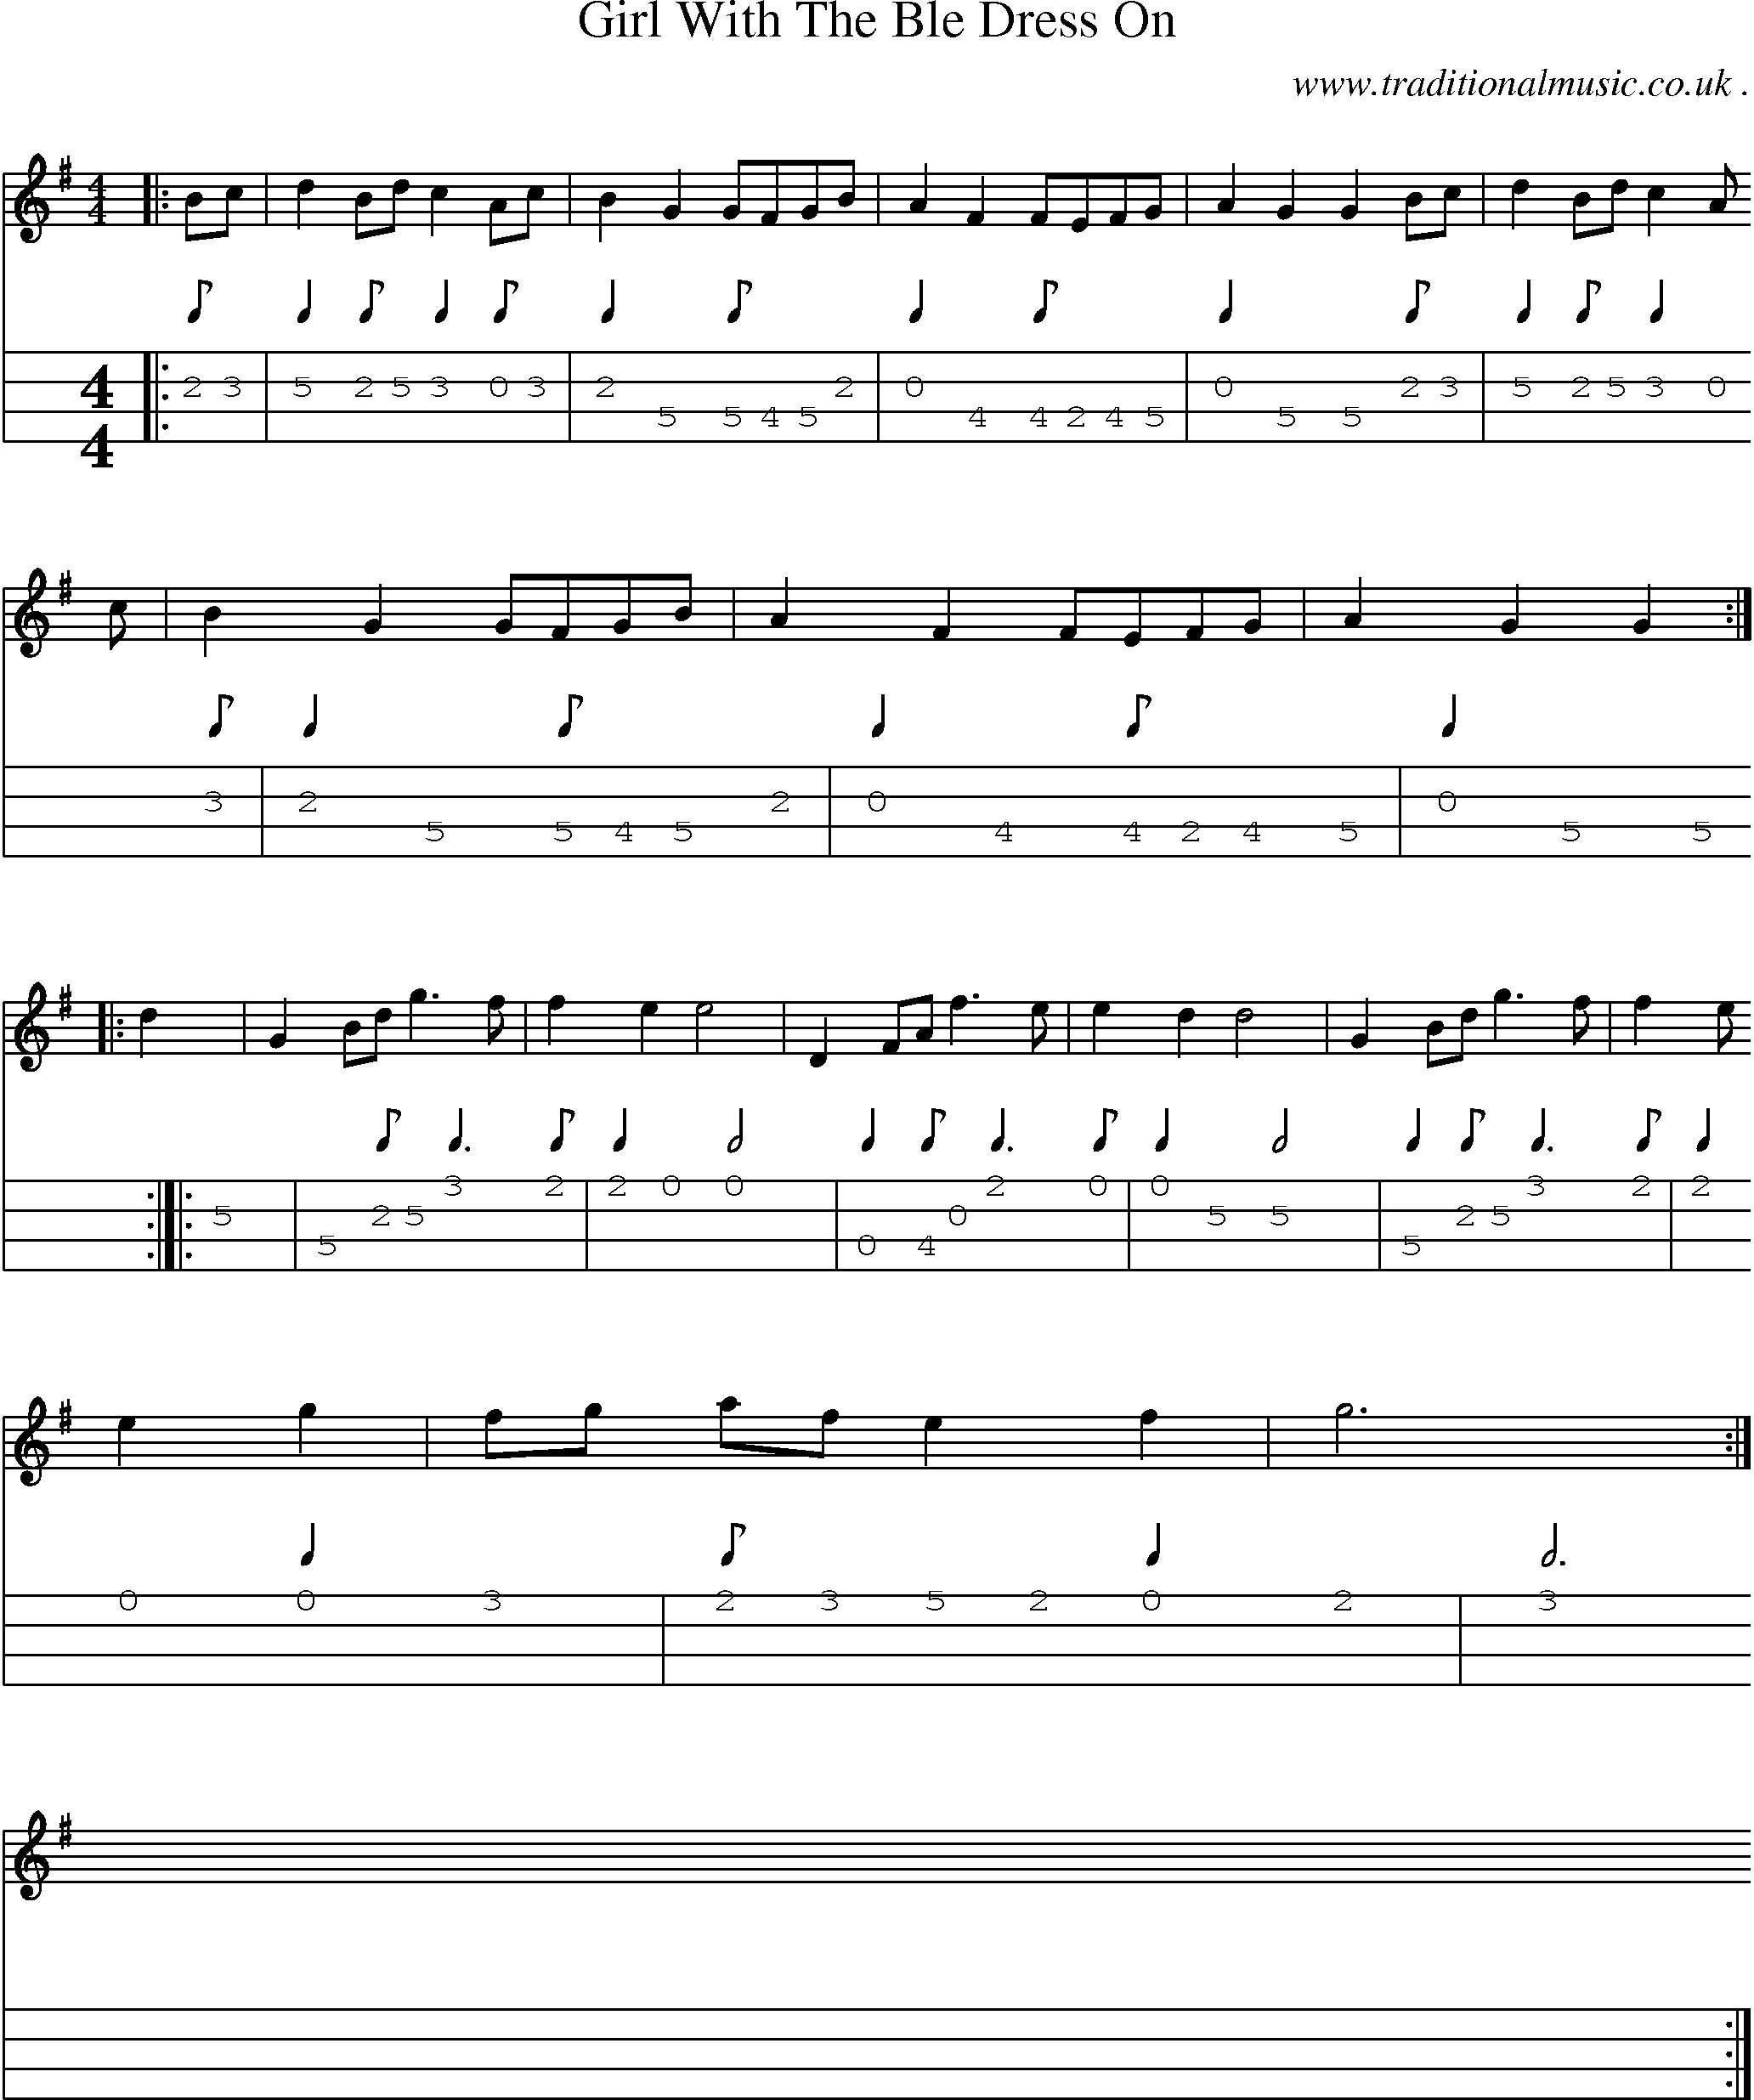 Sheet-Music and Mandolin Tabs for Girl With The Ble Dress On